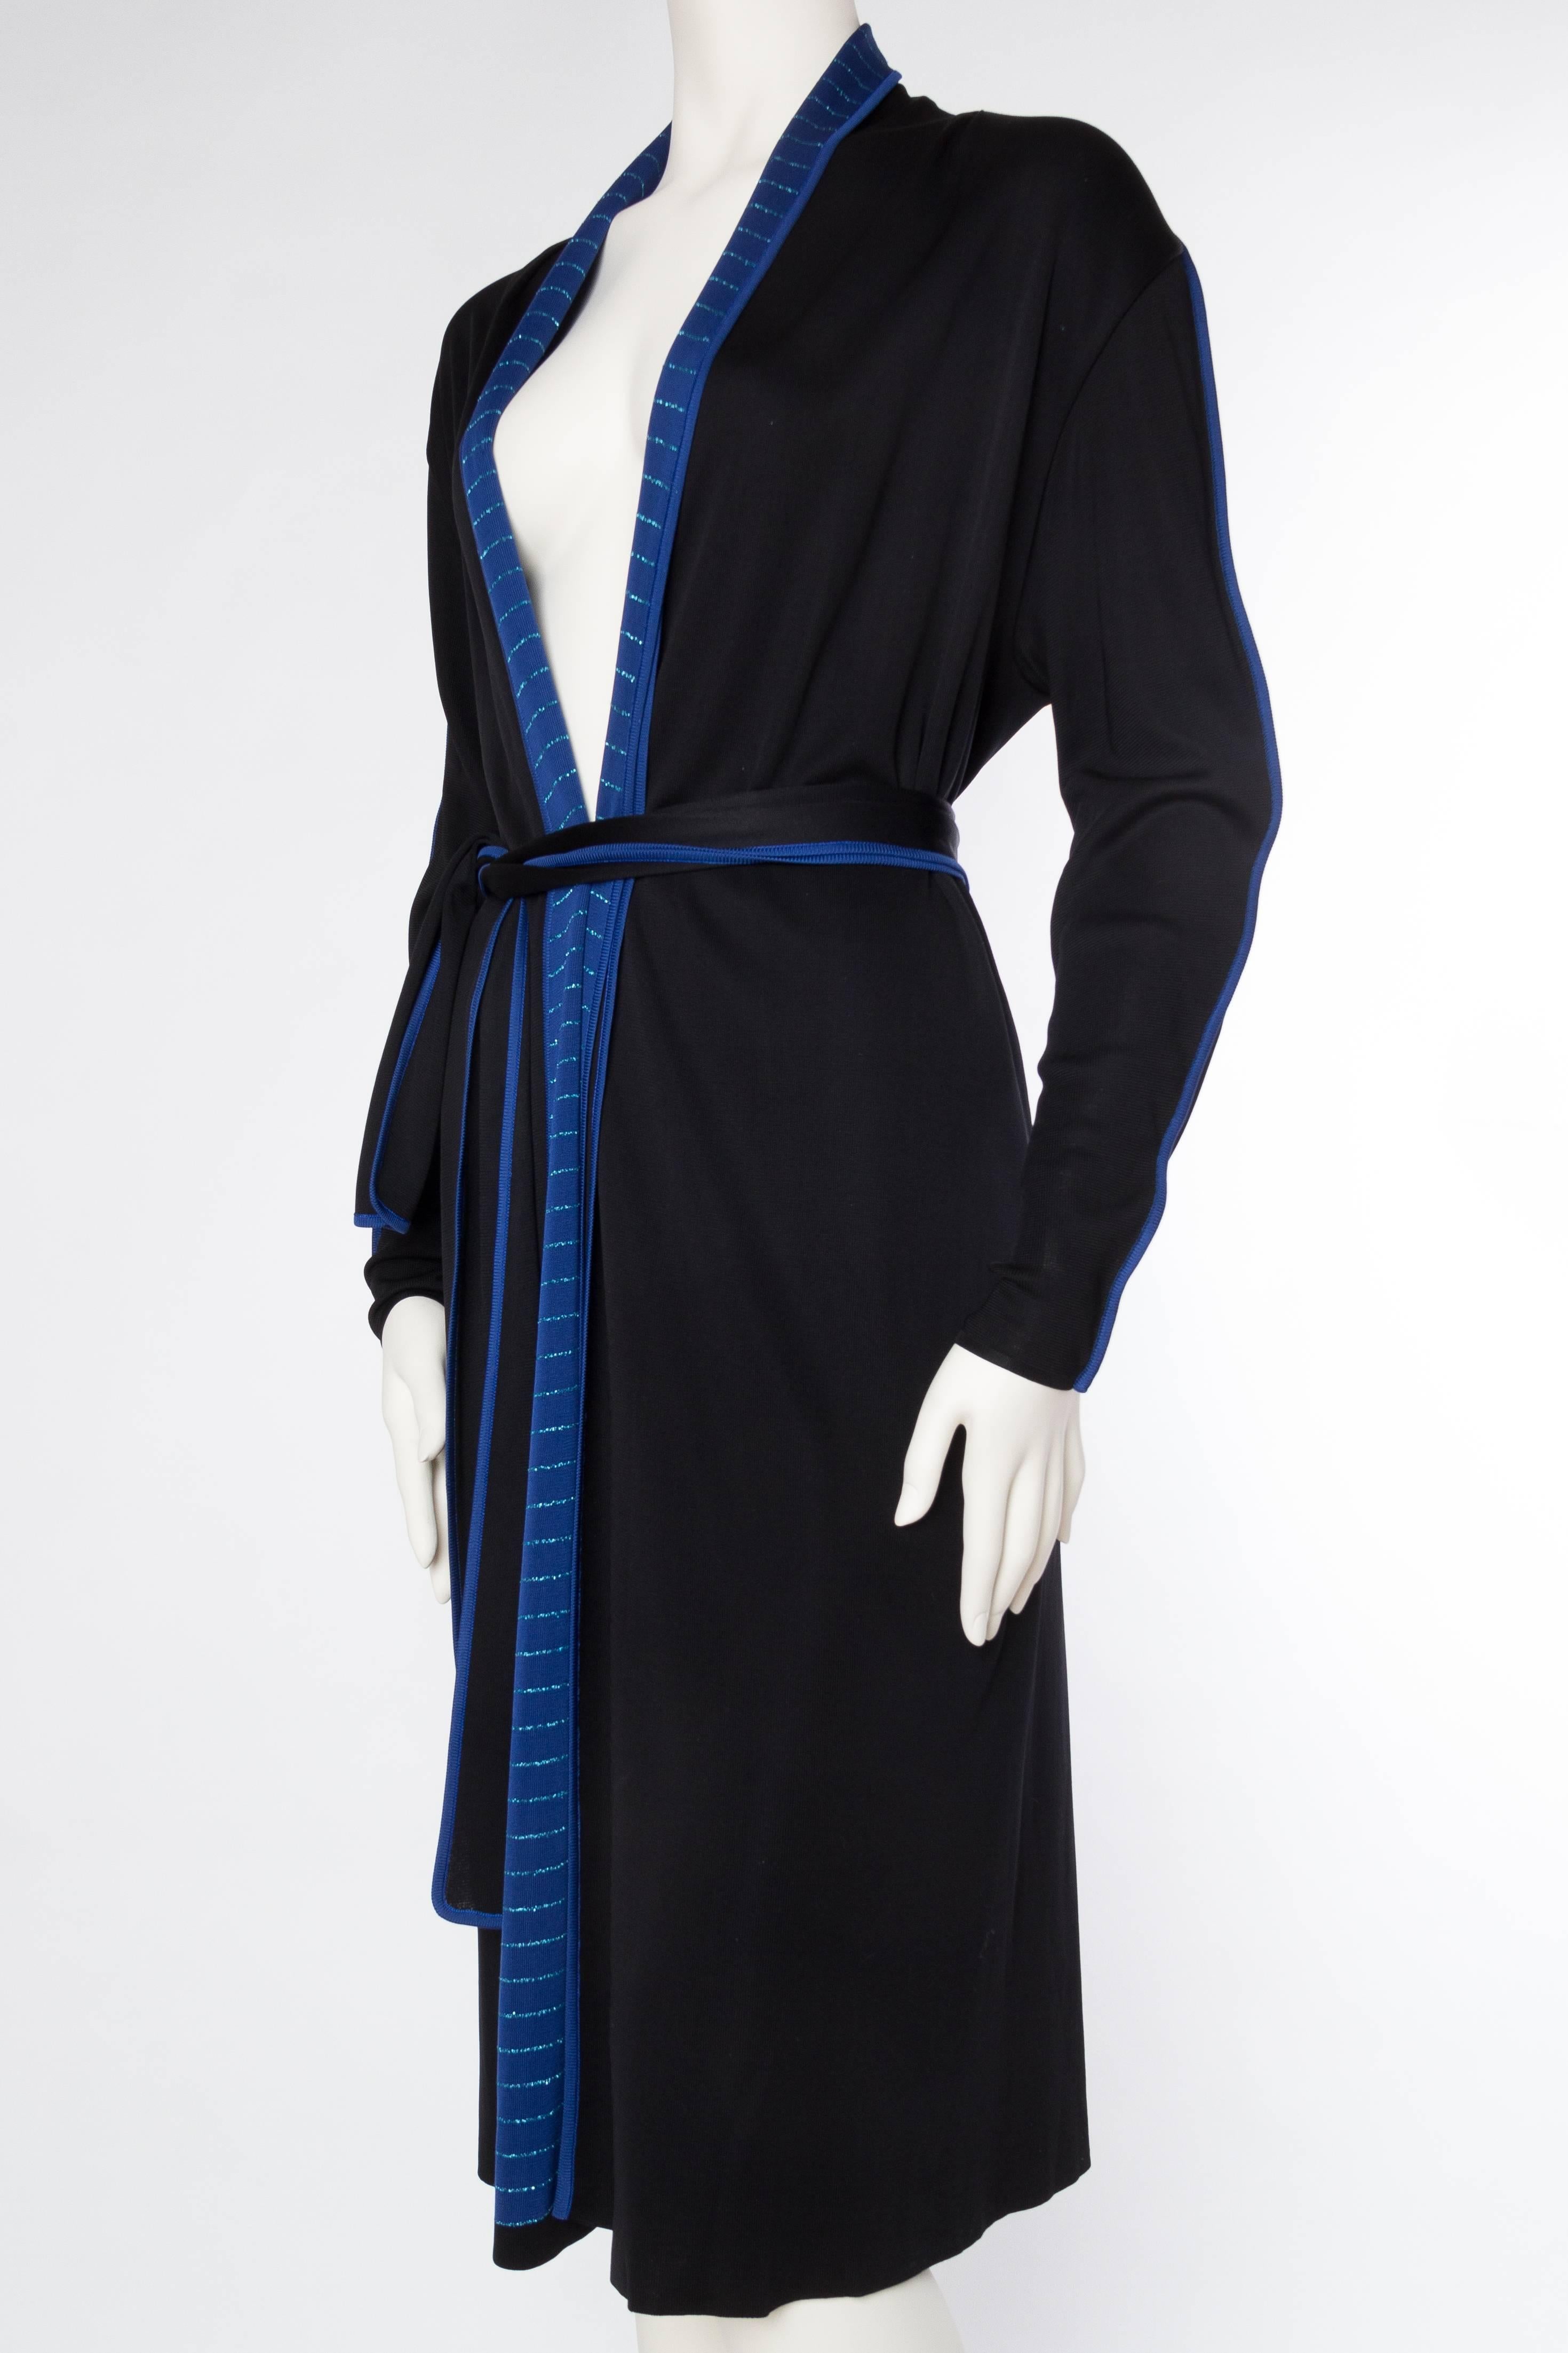 Women's 1970S ISSEY MIYAKE Black & Blue Knit Jersey Cardigan Belted Dress For Sale